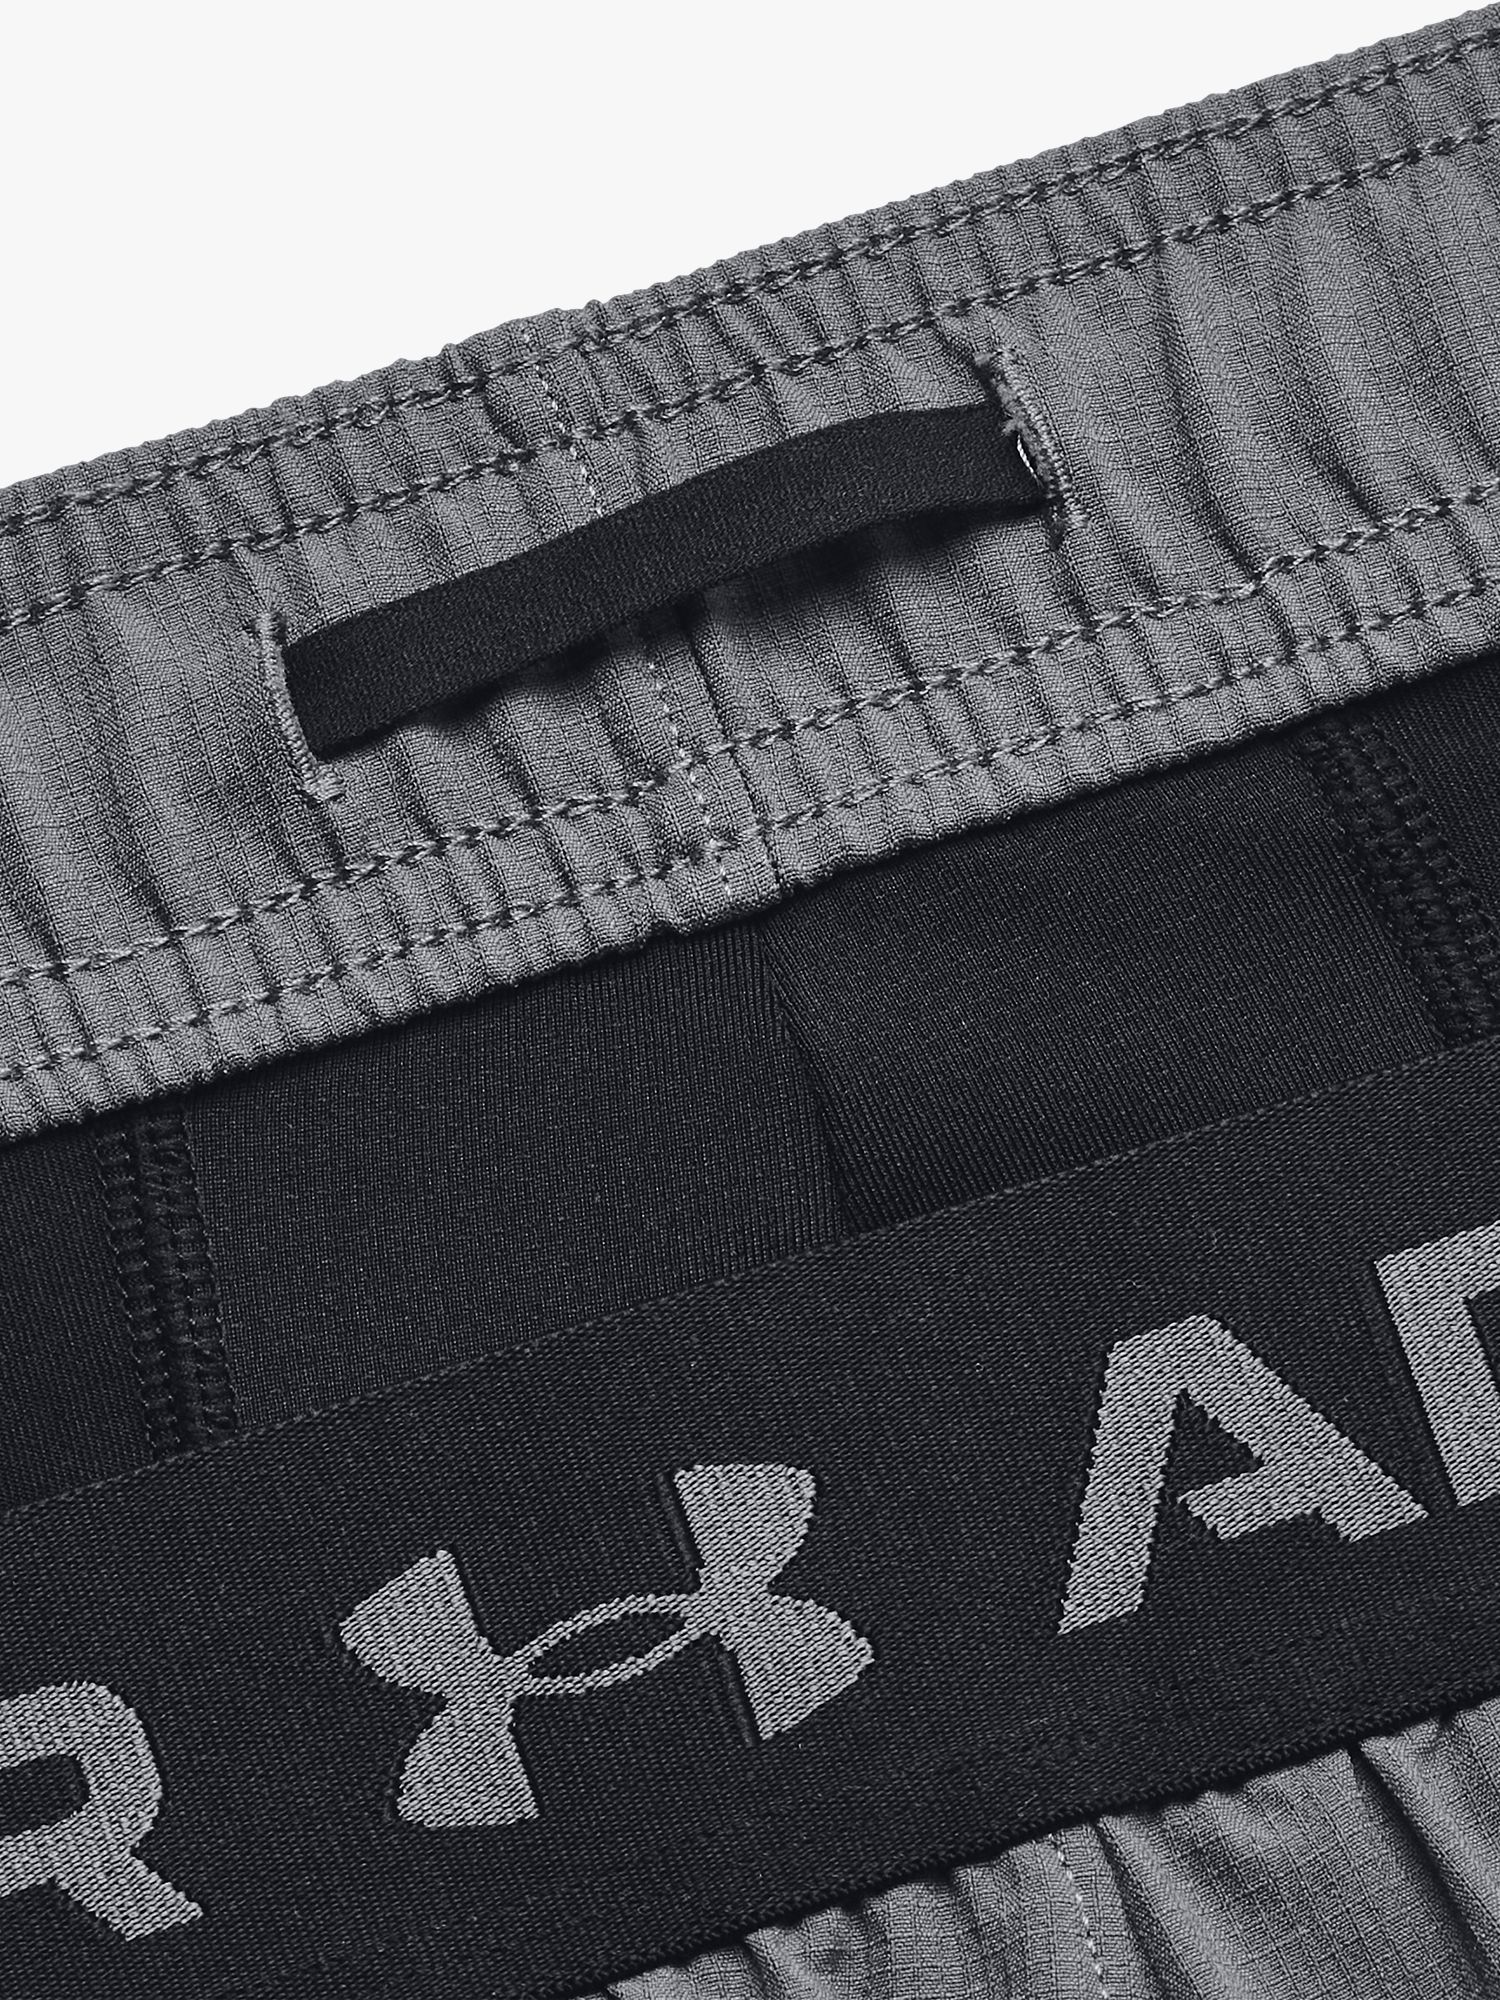 Under Armour Vanish Woven 2-in-1 Gym Shorts, Pitch Grey, S